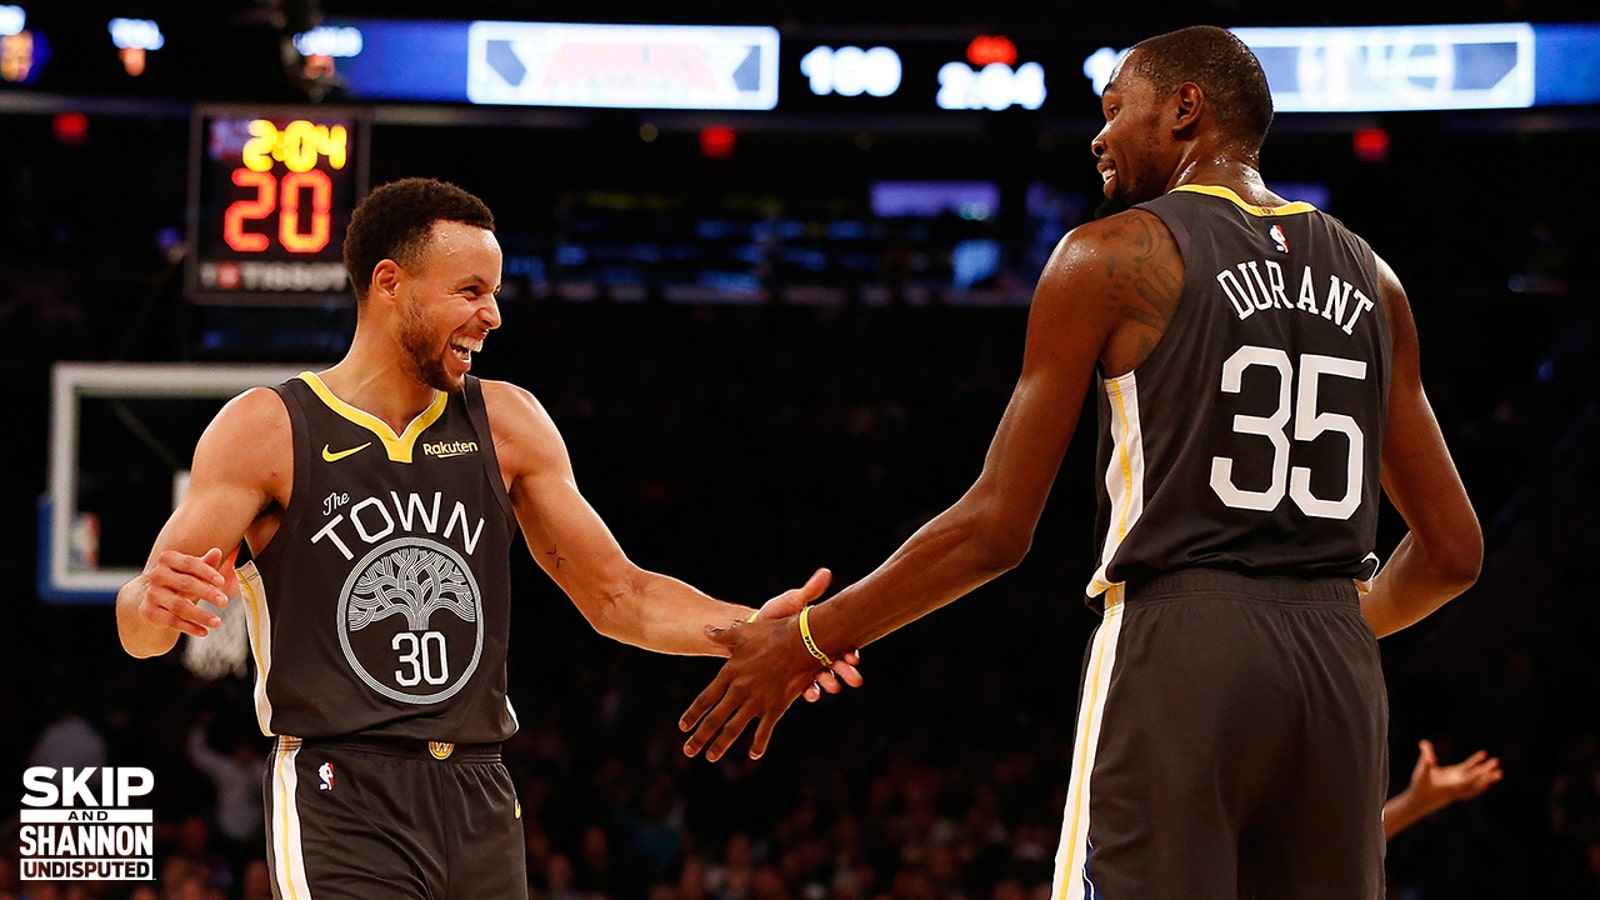 Steph Curry not shutting down possible KD reunion